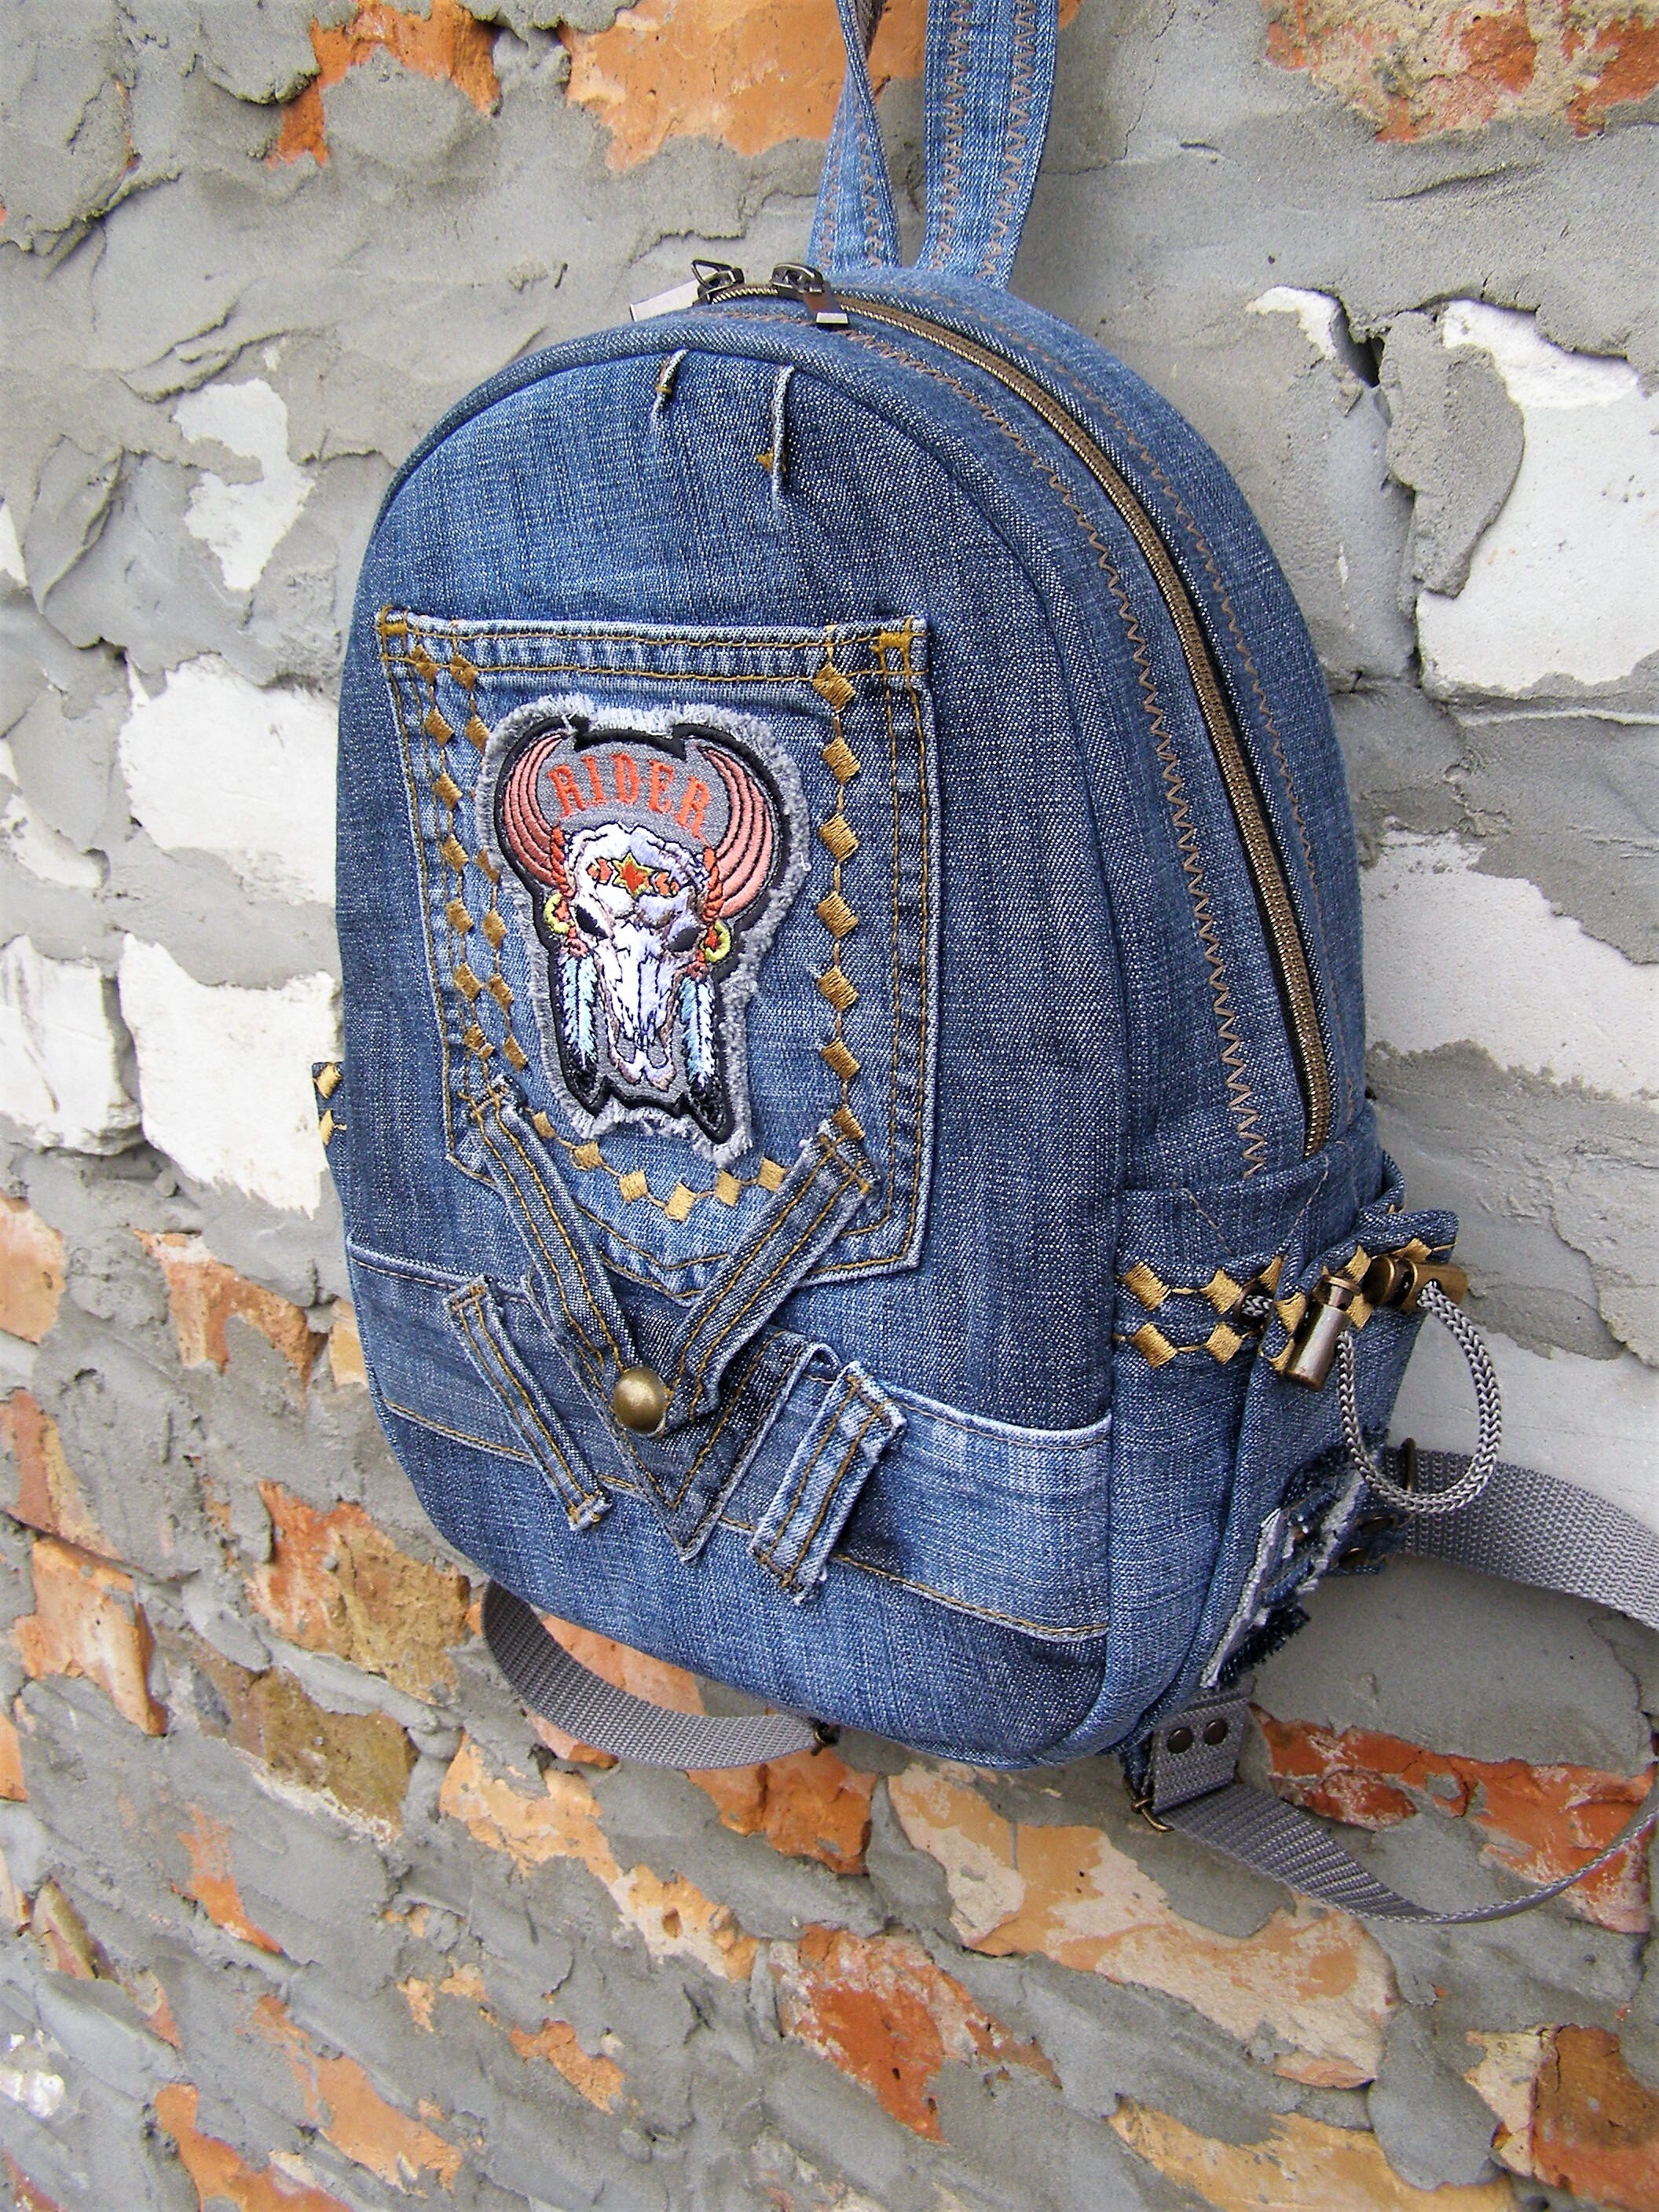 Jeans urban mini backpack with patch Designer stylish | Etsy